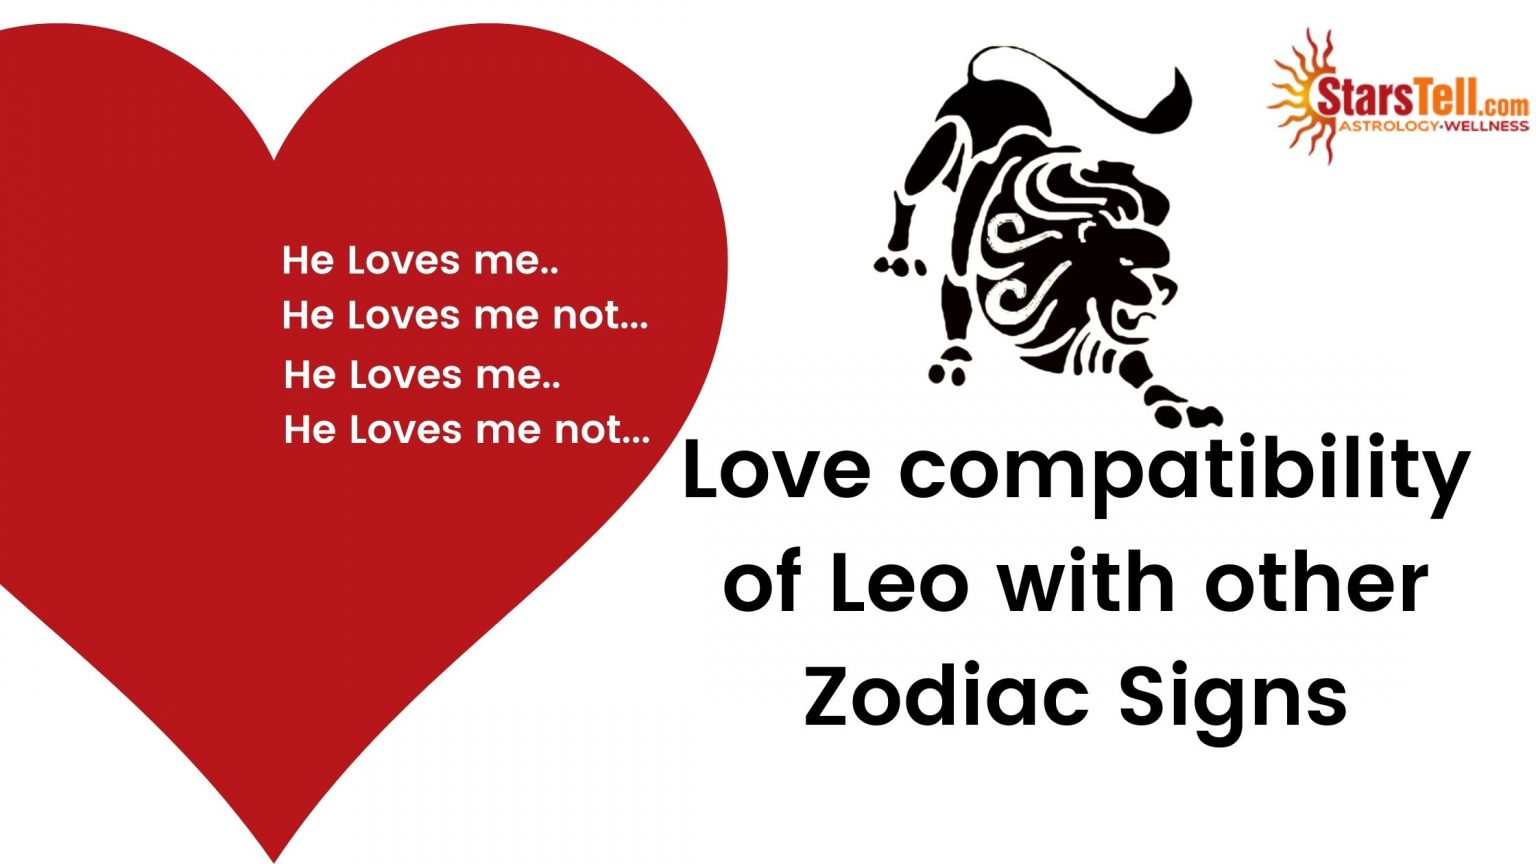 Love compatibility of Leo with other Zodiac Signs | StarsTell